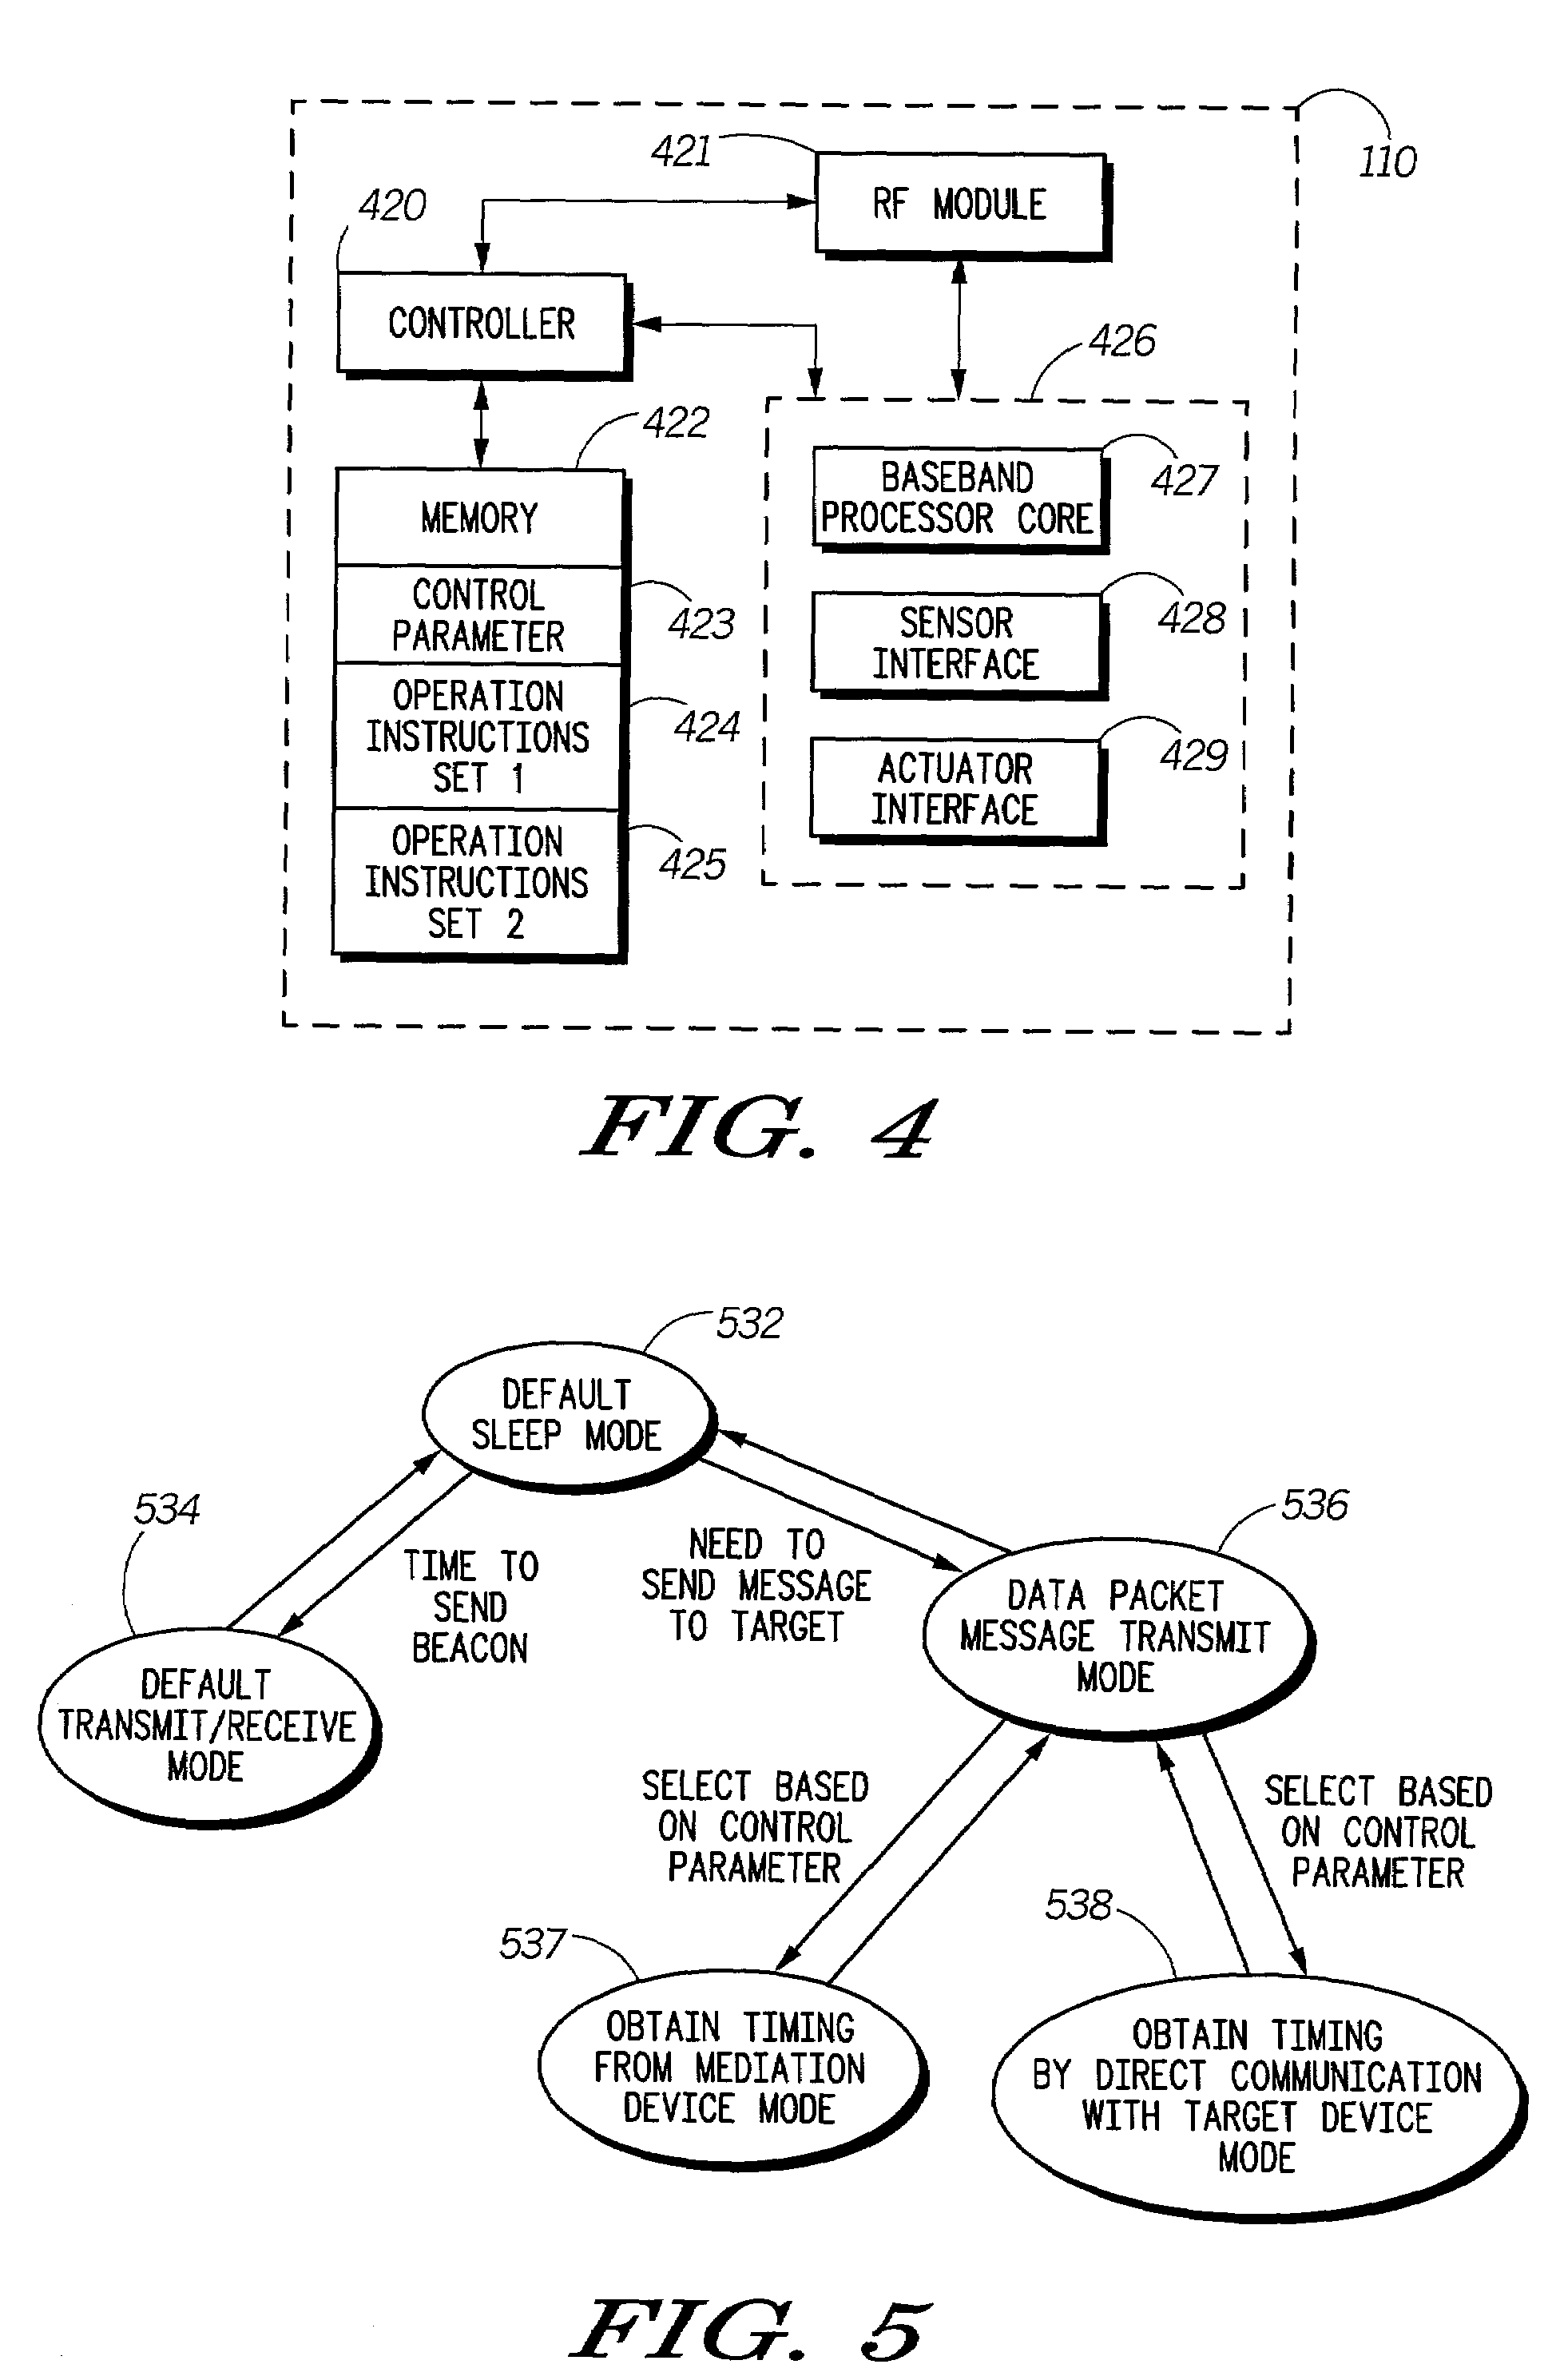 System and method for asynchronous communications employing direct and indirect access protocols